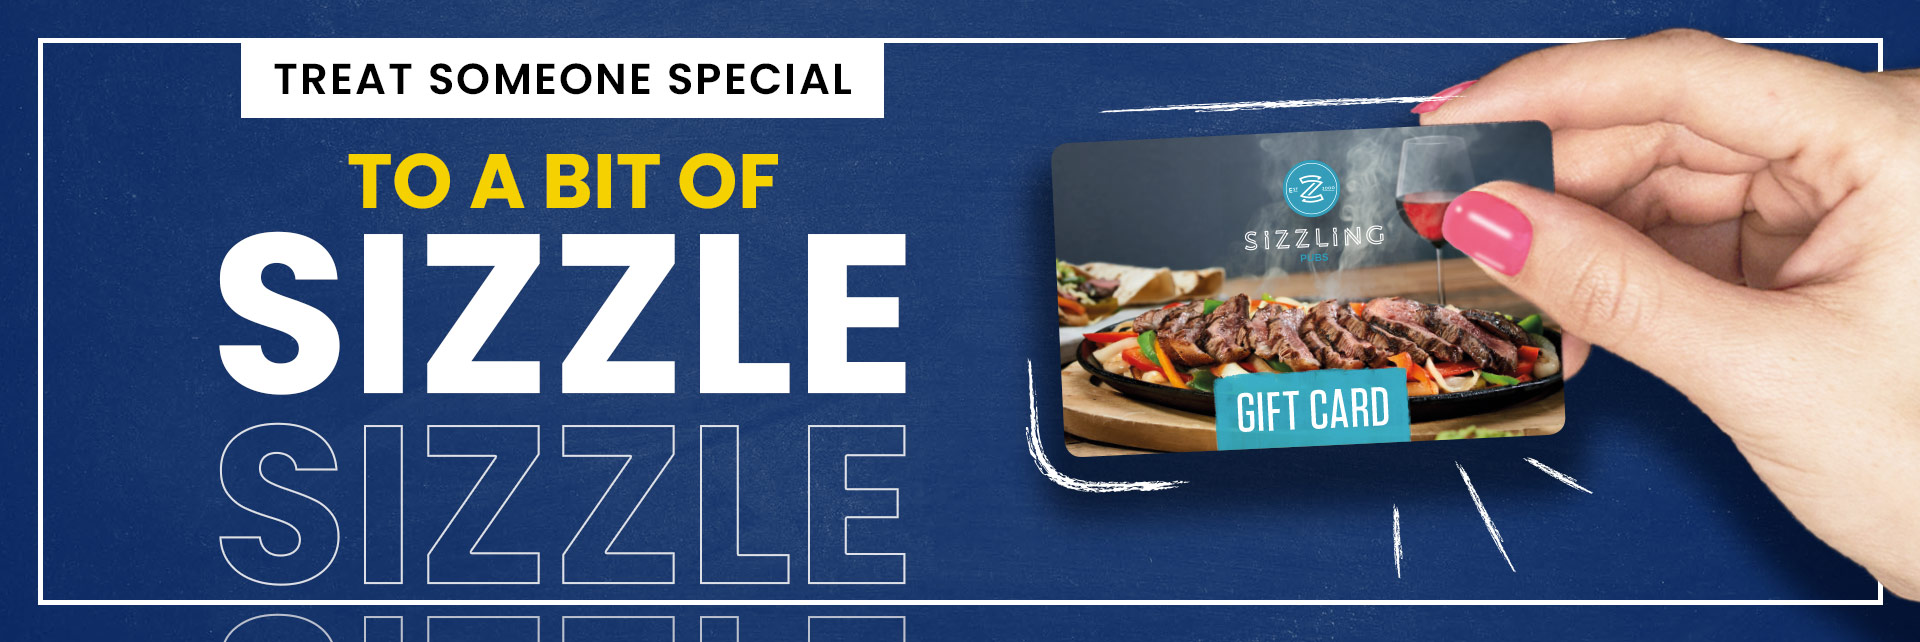 Sizzling Pubs Gift Card at The Hop Pole Hotel in Hull